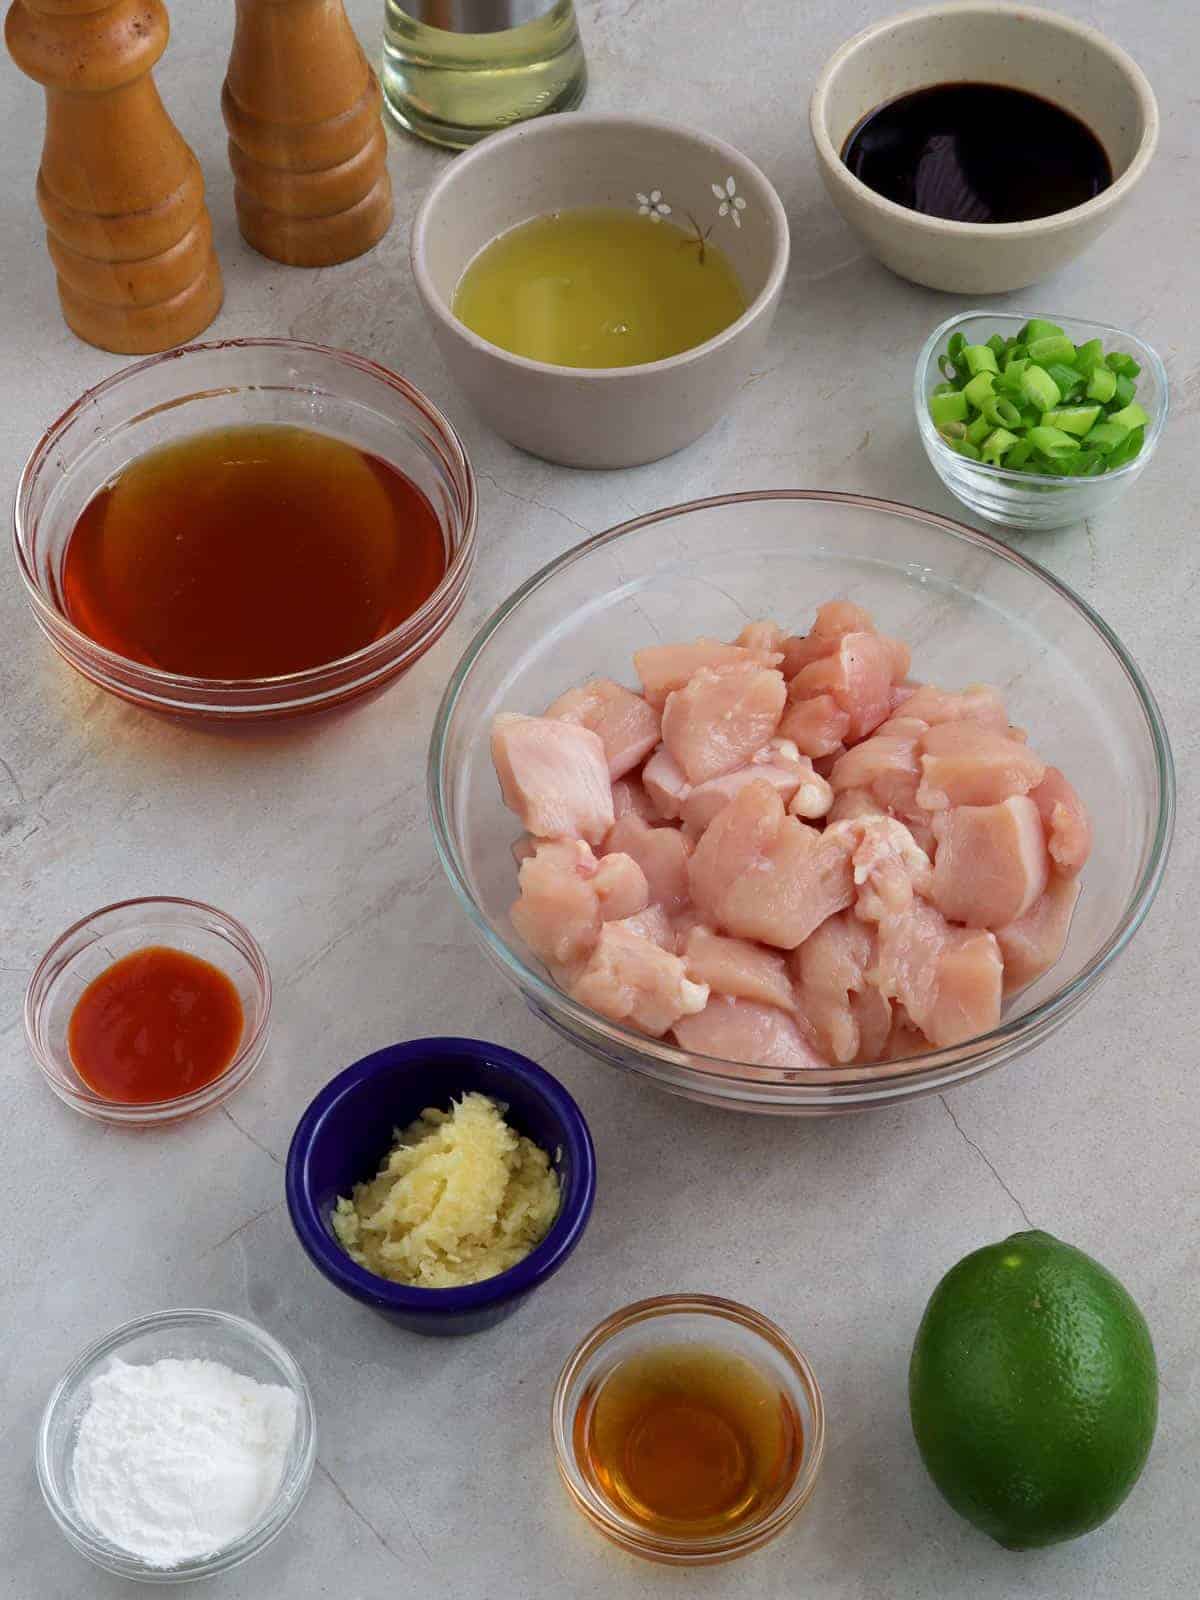 diced chicken breast, honey, lime, garlic, cornstarch, egg whites, Sriracha sauce, green onions, soy sauce in individual bowls